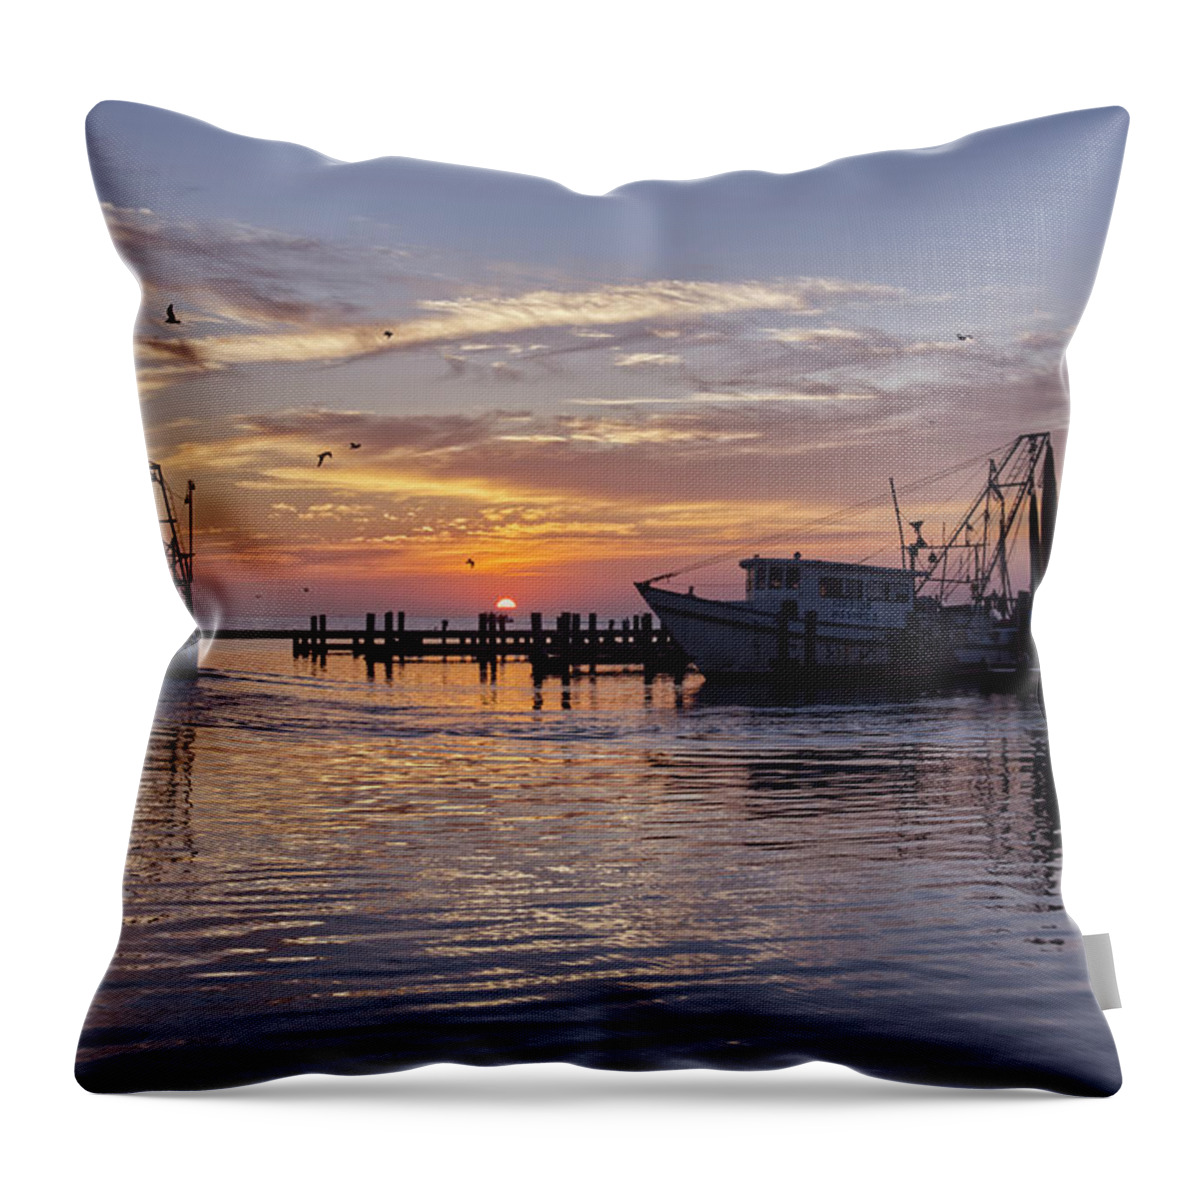 Oyster Throw Pillow featuring the photograph Oyster Boat by Ty Husak